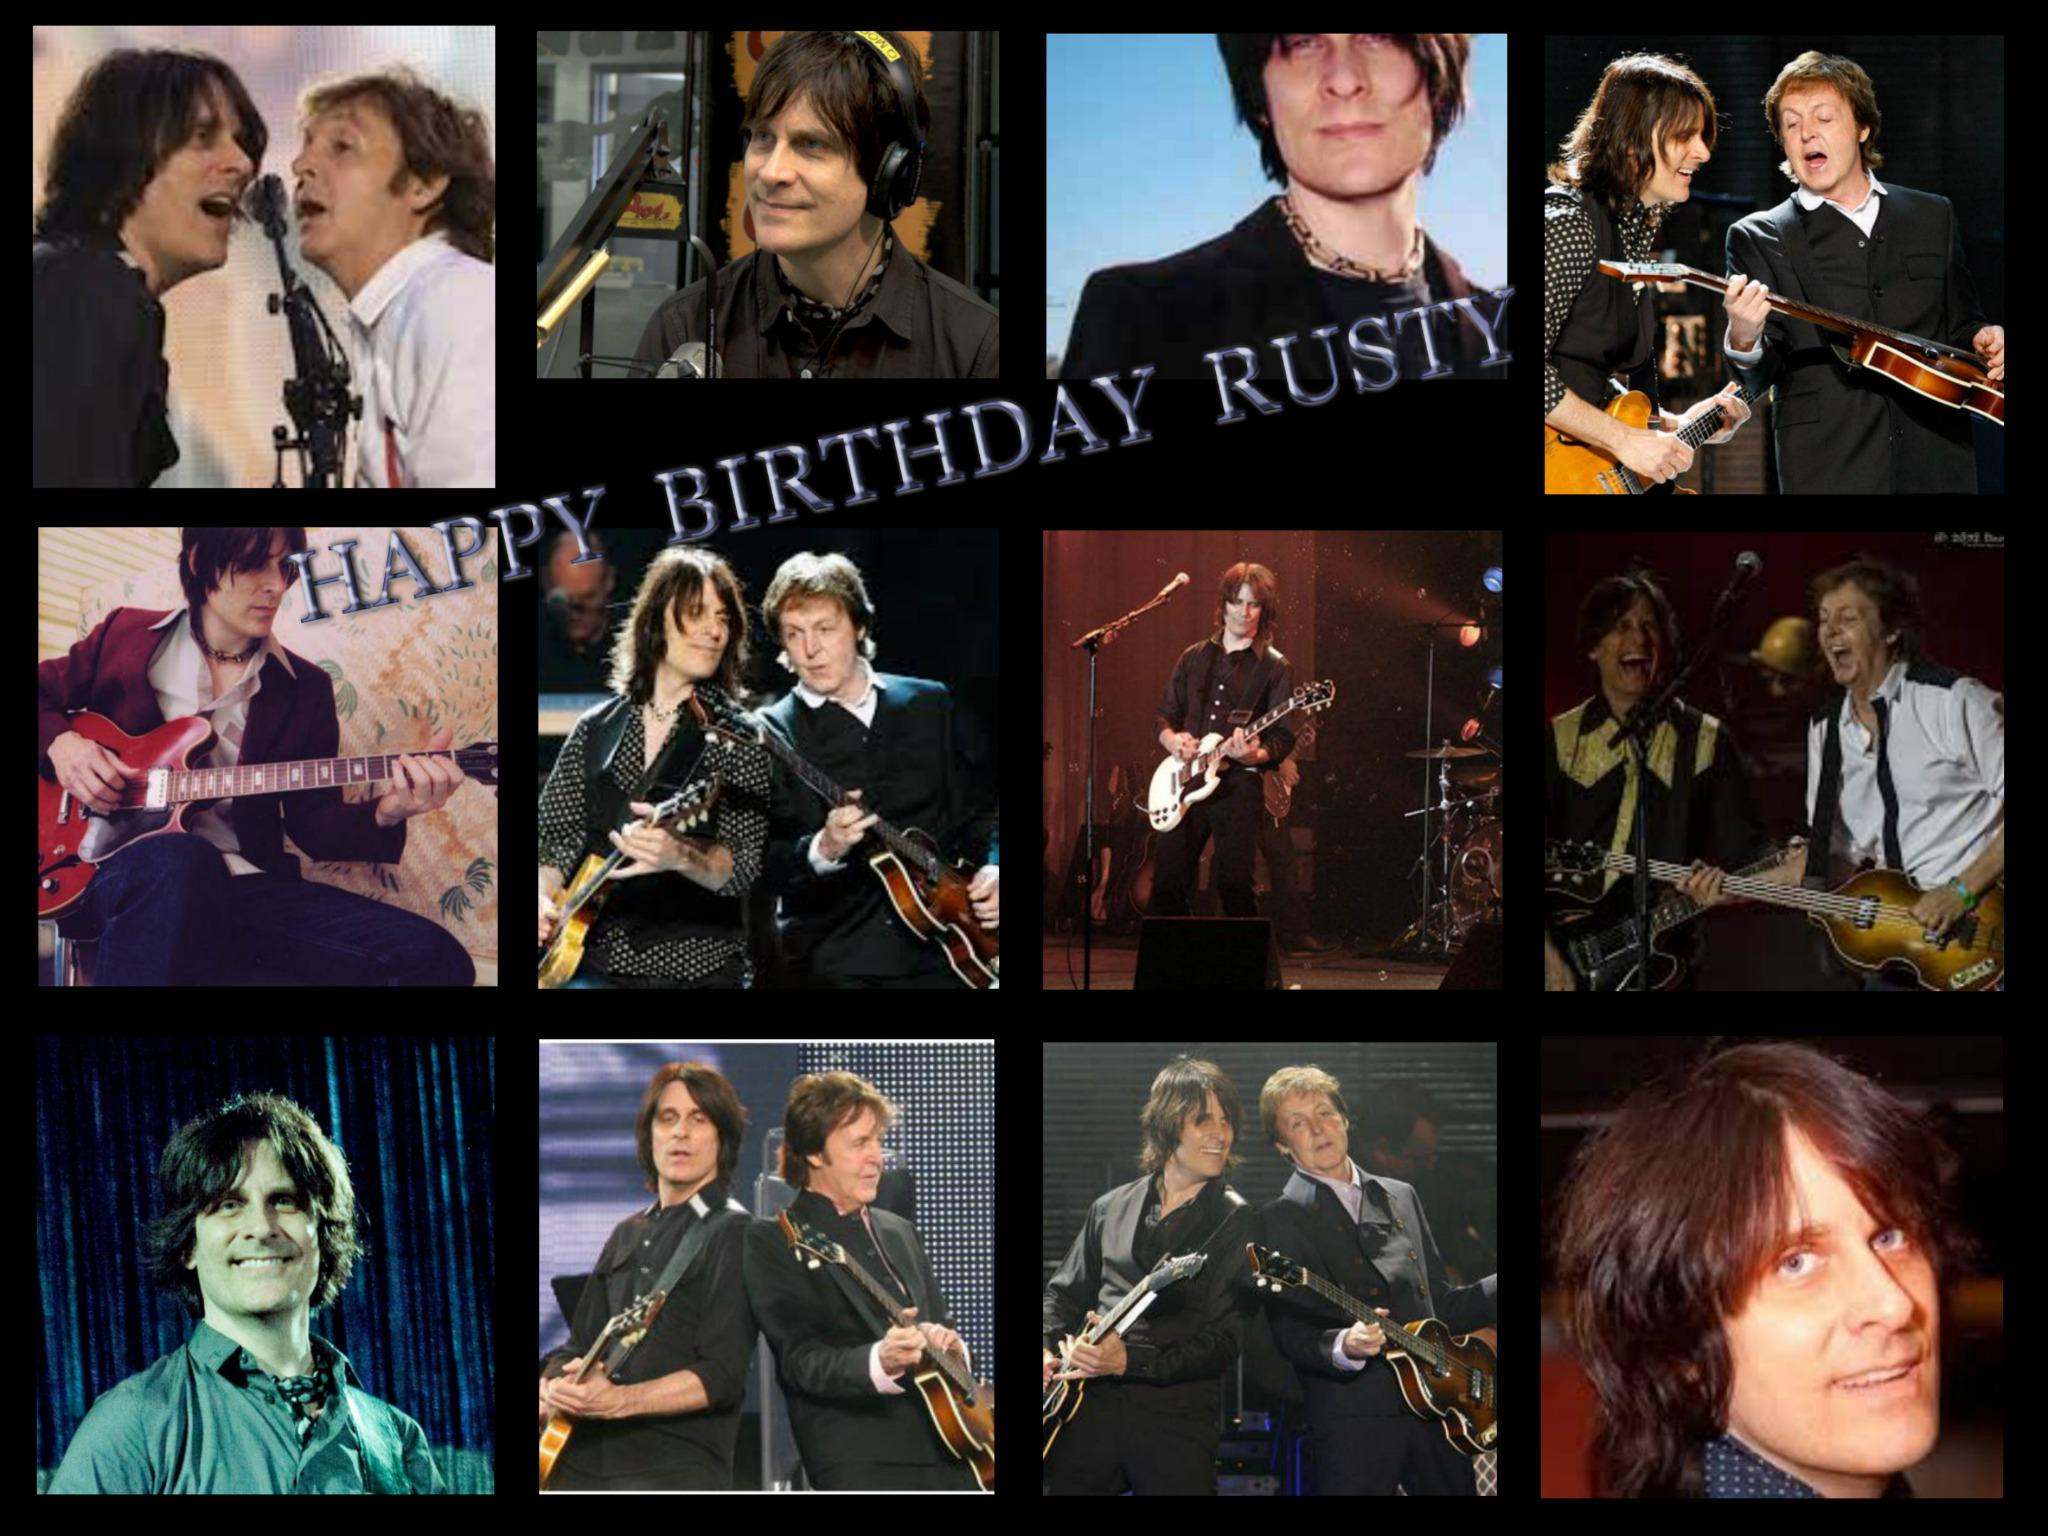  Dear Rusty Anderson, from Spain, I wish you all the best, happy birthday friend 